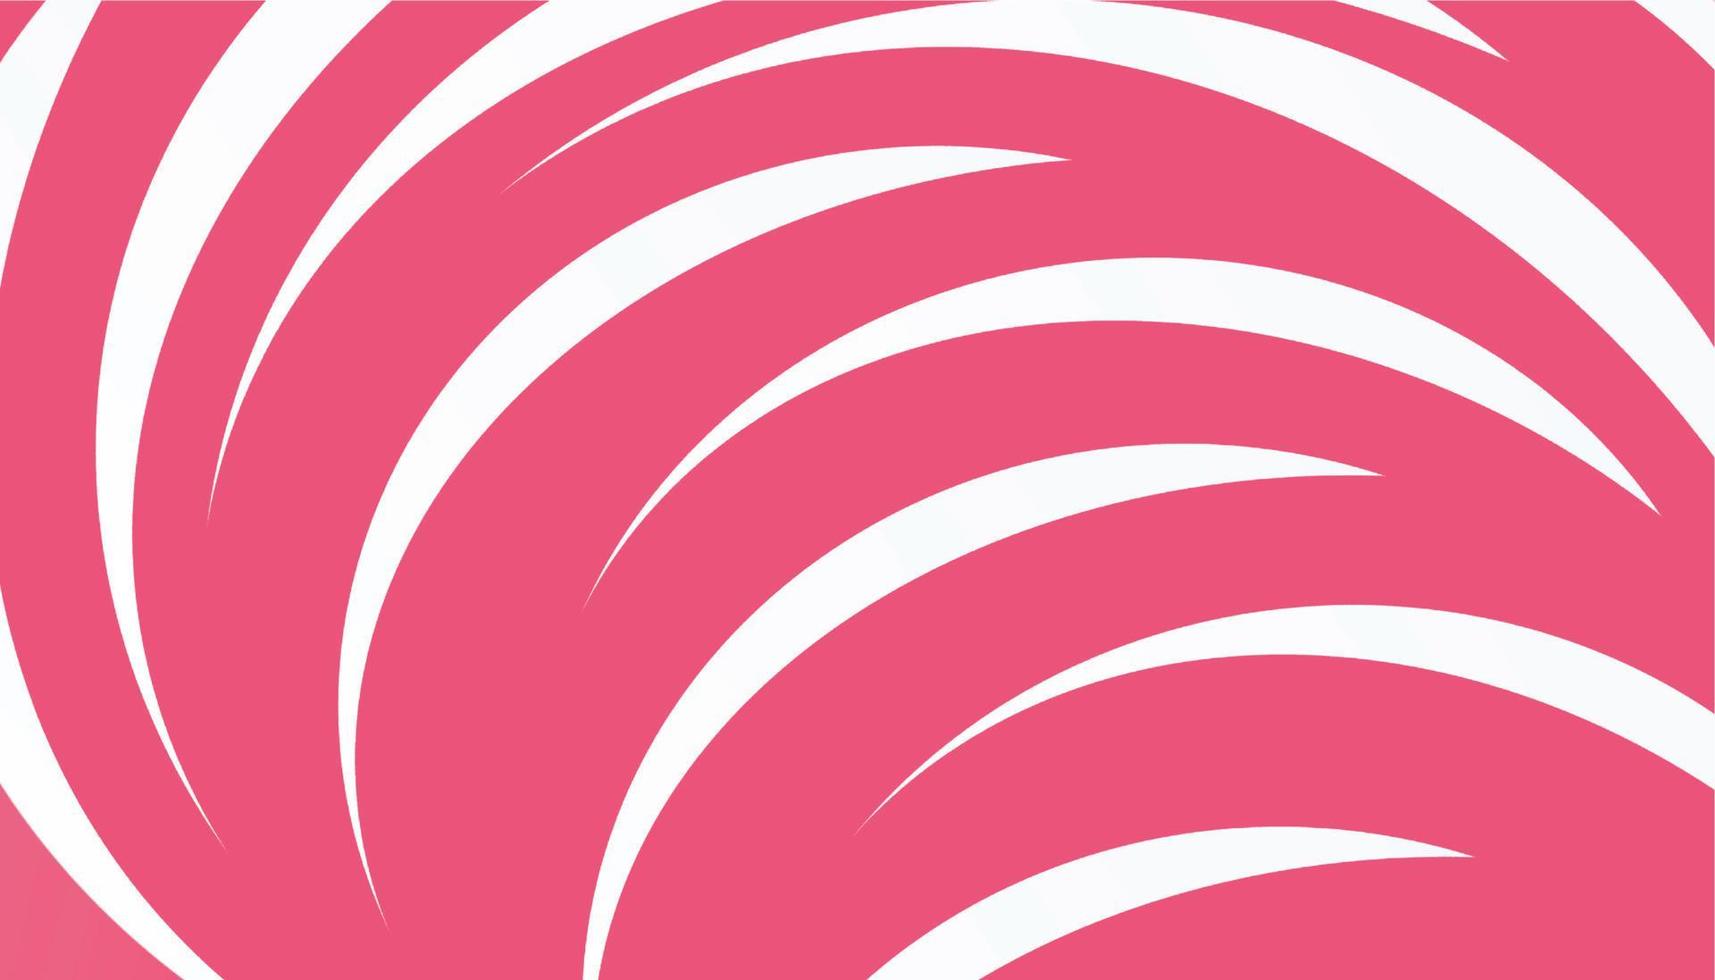 White Curves with a pink background vector